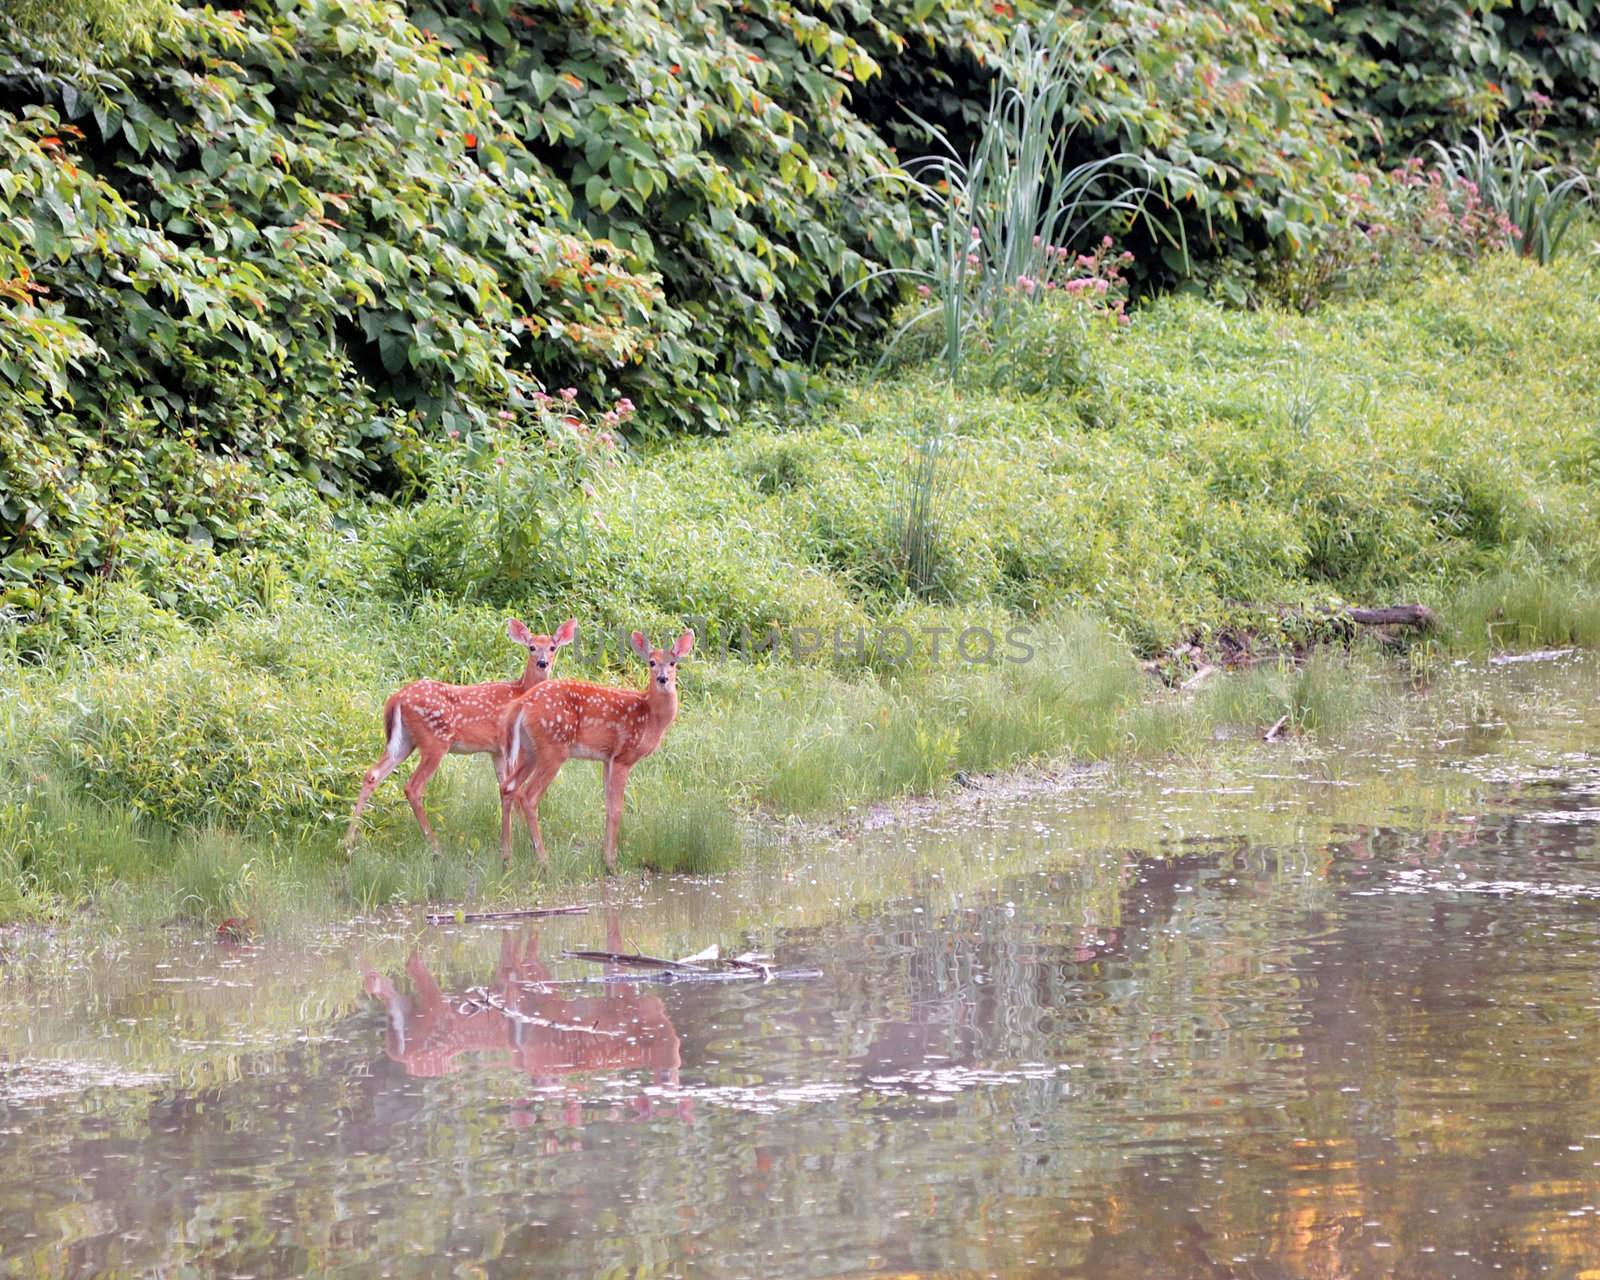 Whitetail Deer Fawns by brm1949